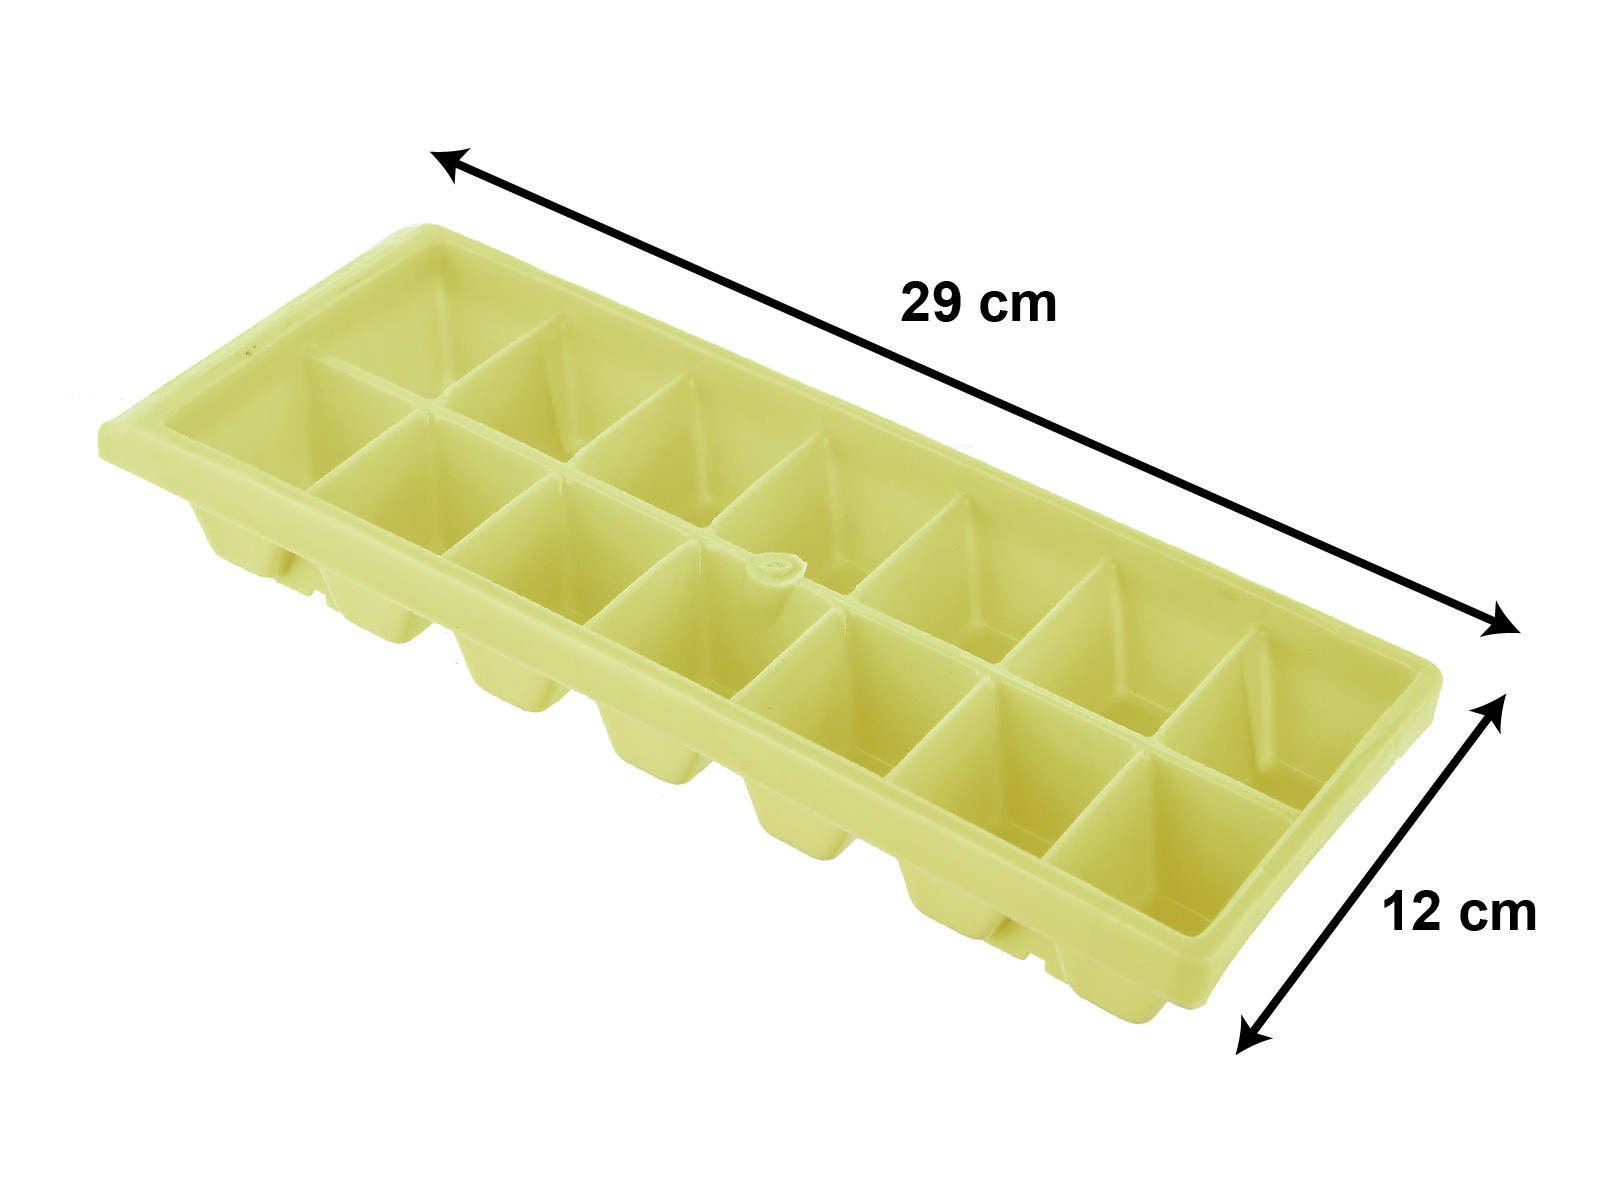 Kuber Industries Plastic Ice Cube Tray Set With 14 Section-(Green & Pink)-HS43KUBMART25791